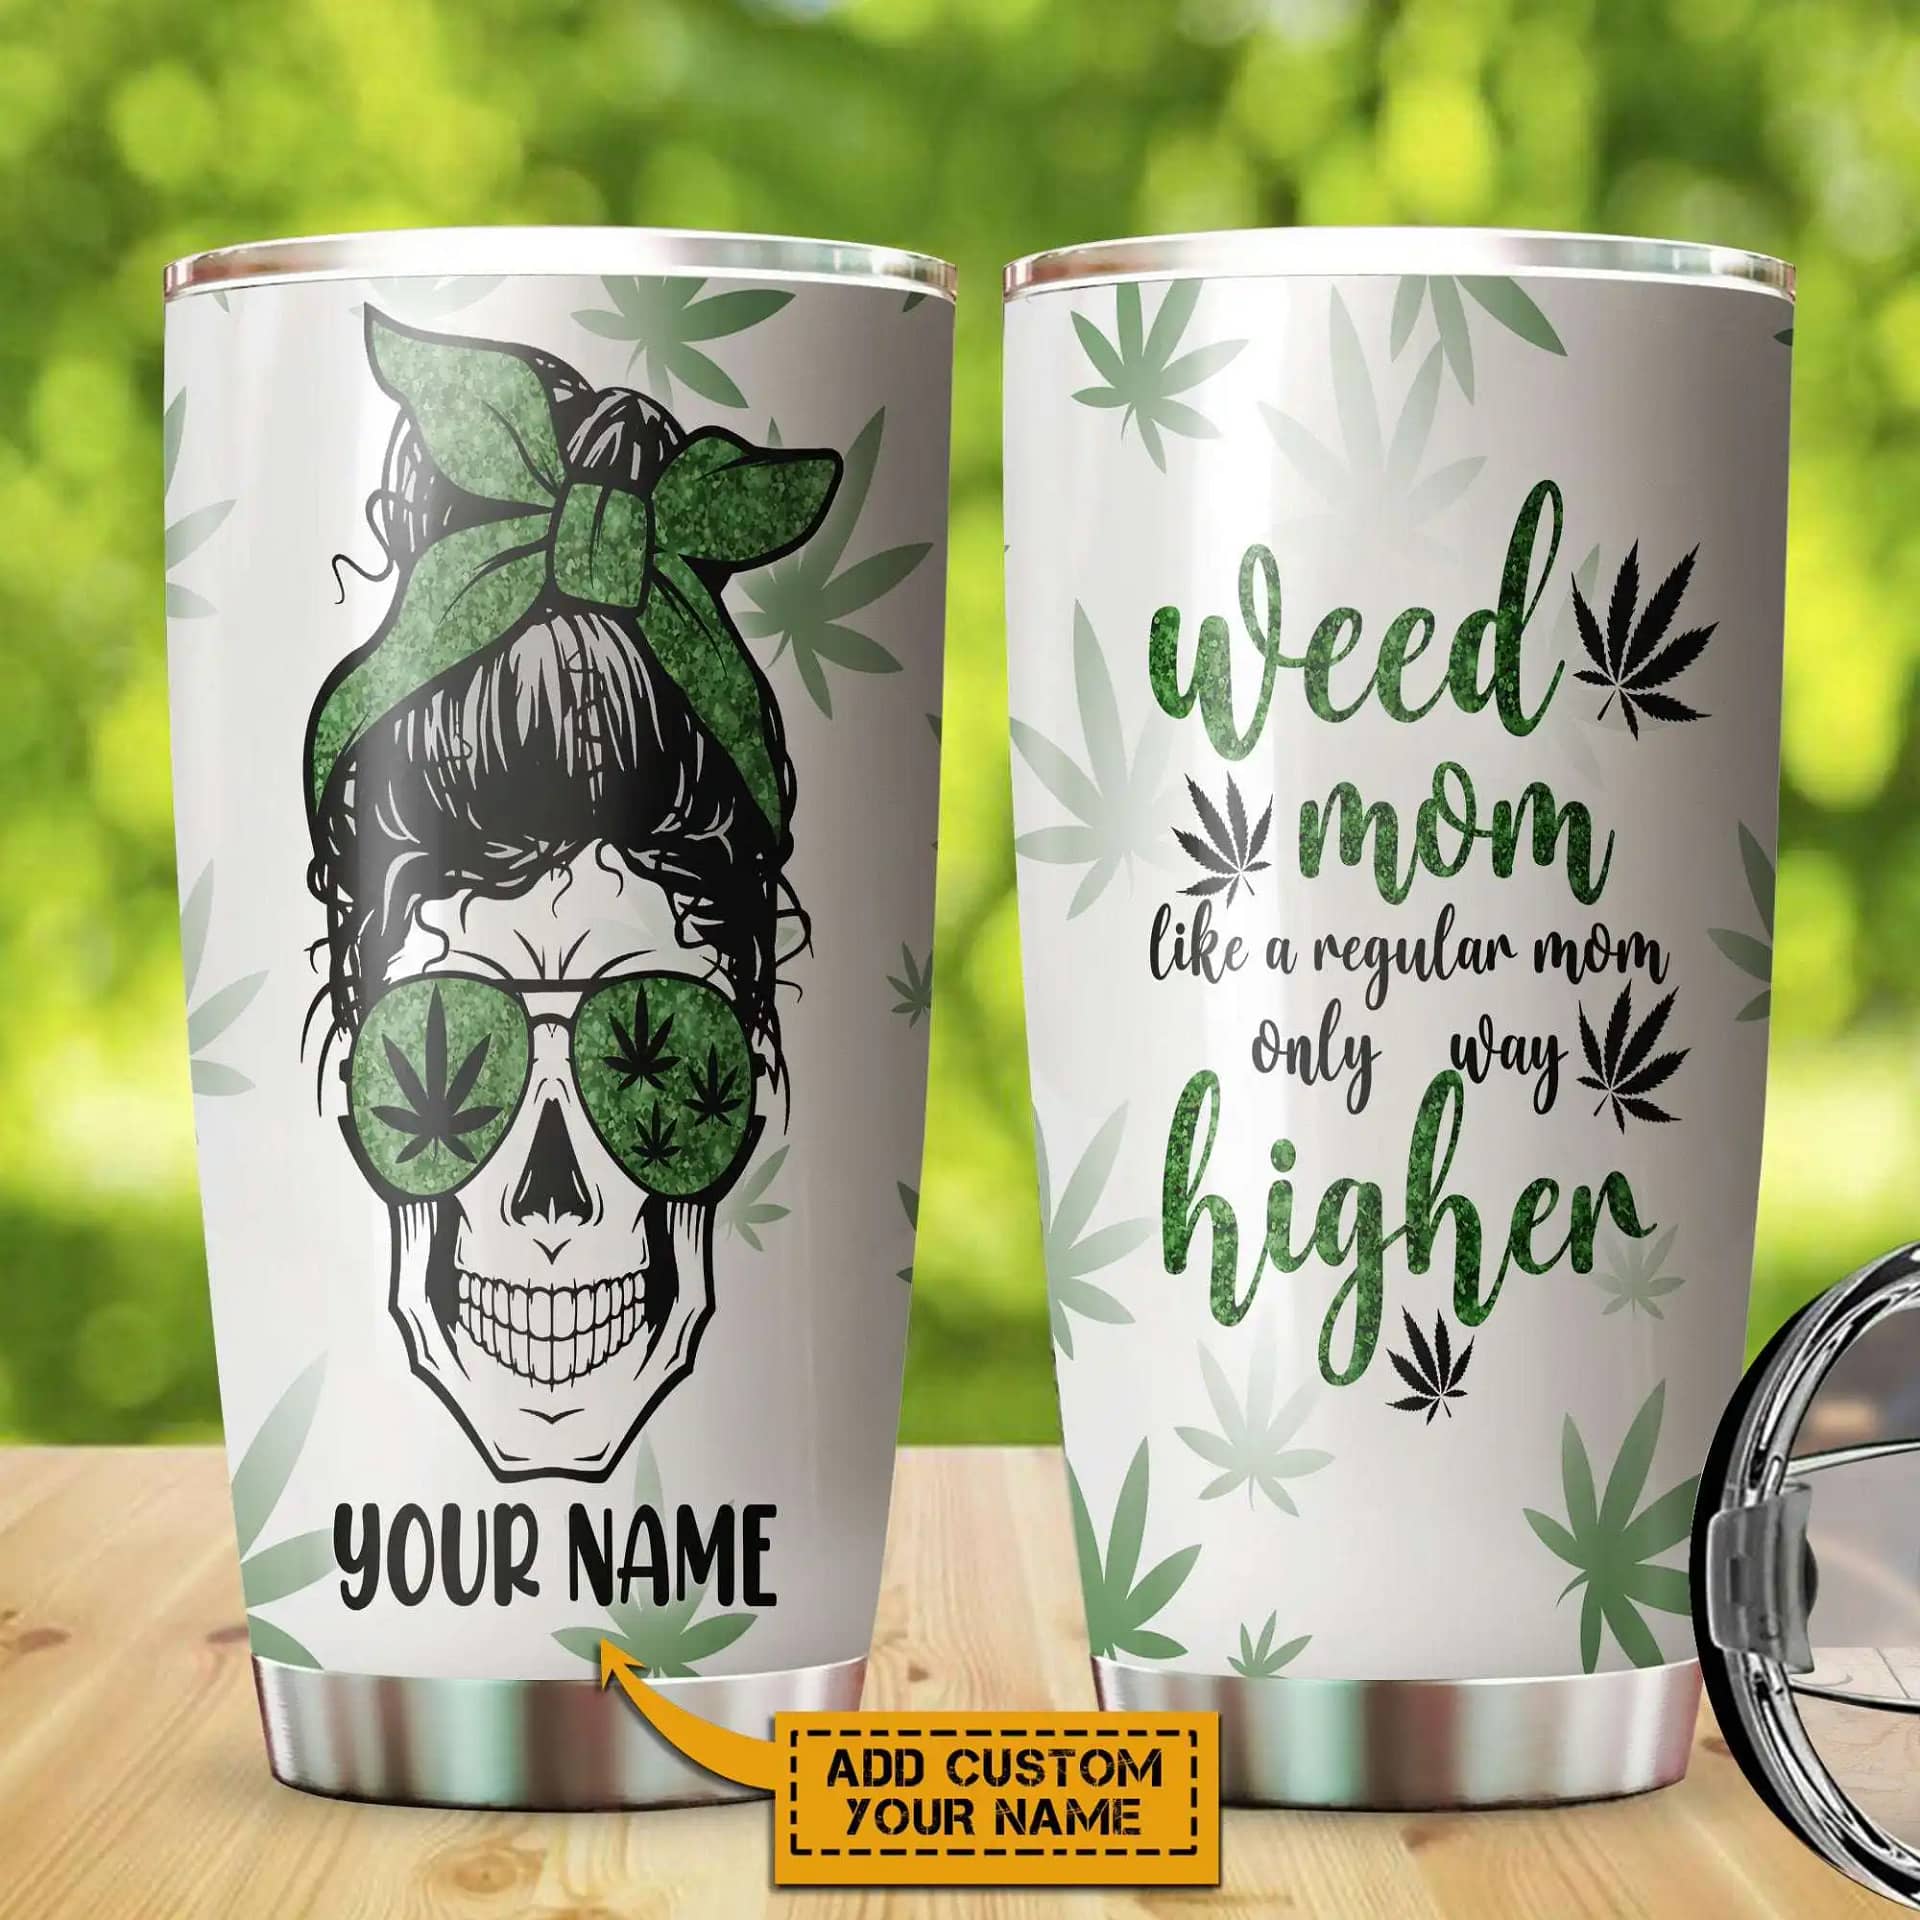 Personalized Weed Lsd Psychedelic Mom Like A Regular But Higher Custom Name Skinny Gift Stainless Steel Tumbler